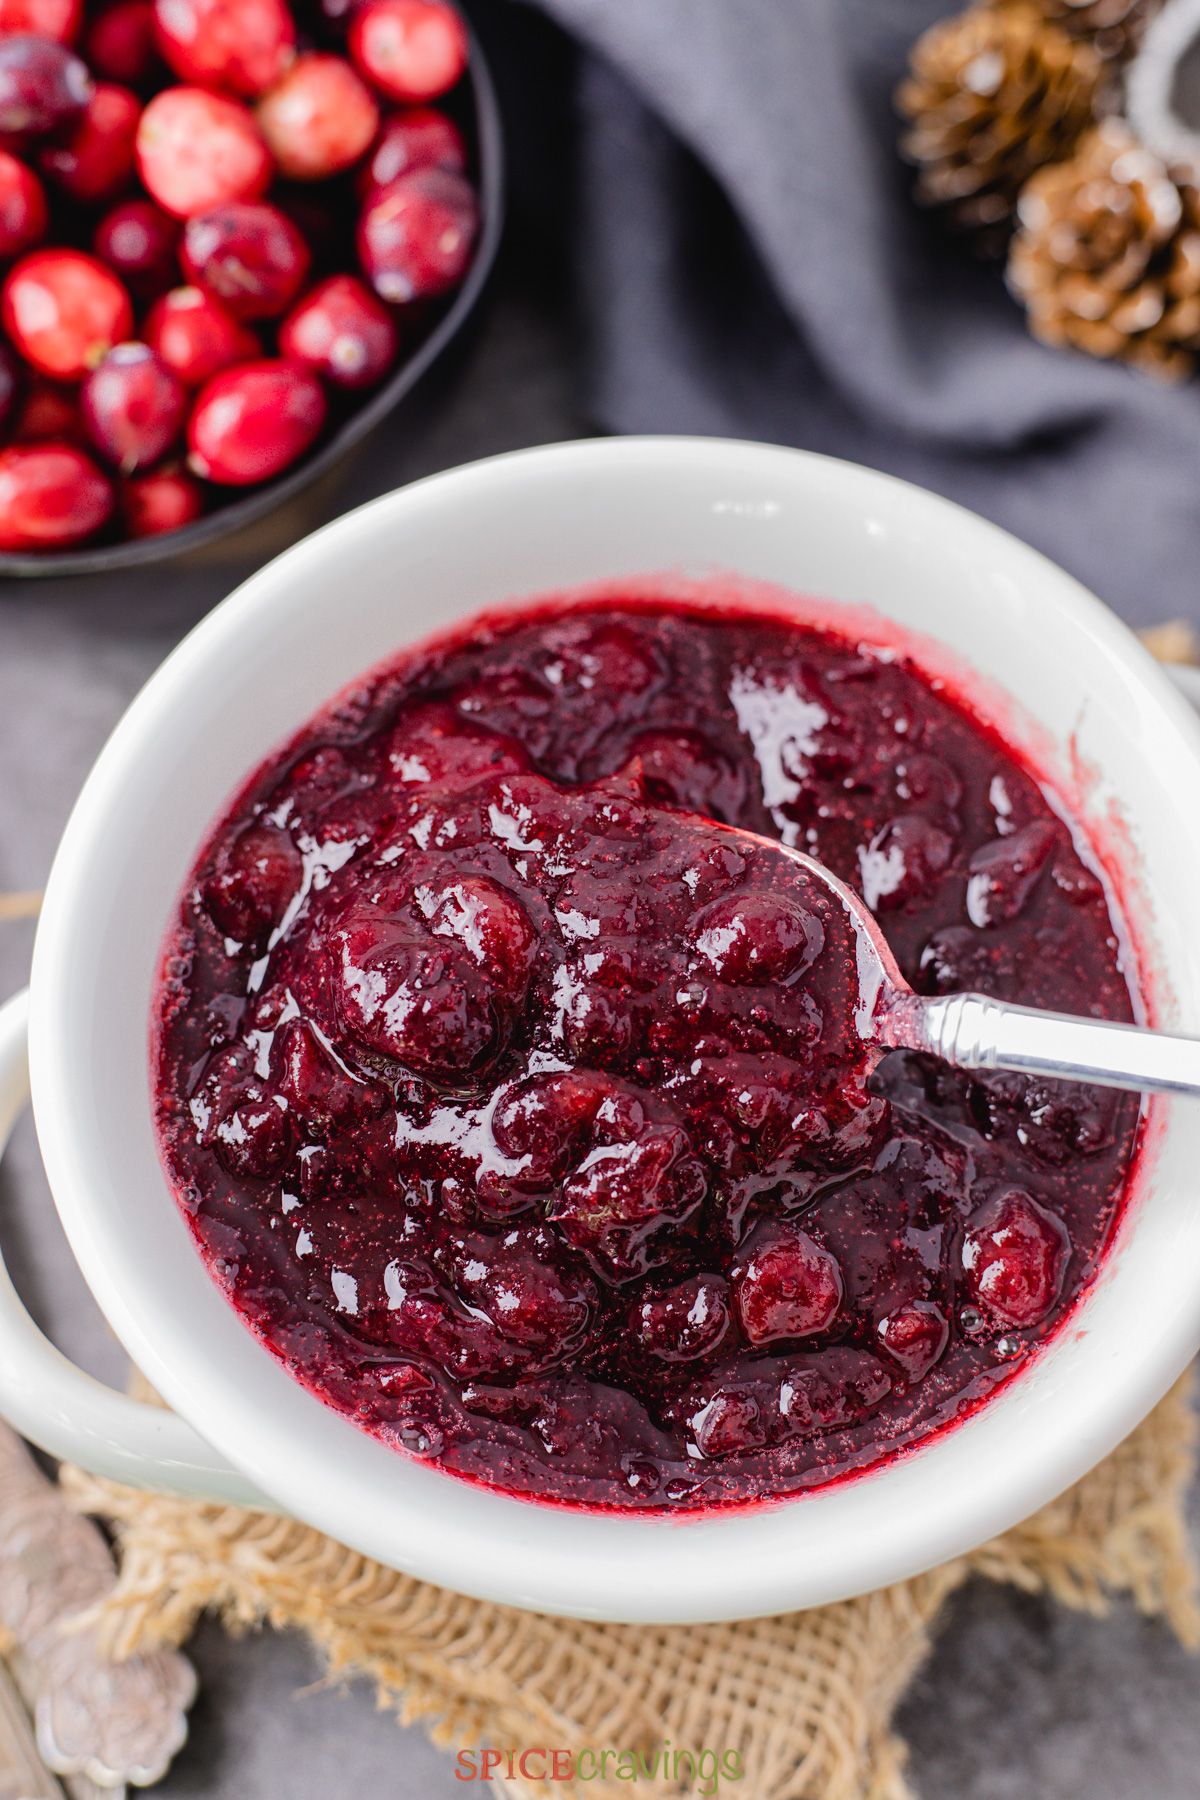 Cranberry Sauce Instant Pot by Spice Cravings. Cranberry sauce is a jam like relish made by cooking cranberries with sugar. A popular accompaniment served with Turkey at Thanksgiving & Christmas dinner. #food #foodie #foodblogger #delicious #recipe #instantpot #recipes #easyrecipe #cuisine #30minutemeal #instagood #foodphotography #tasty